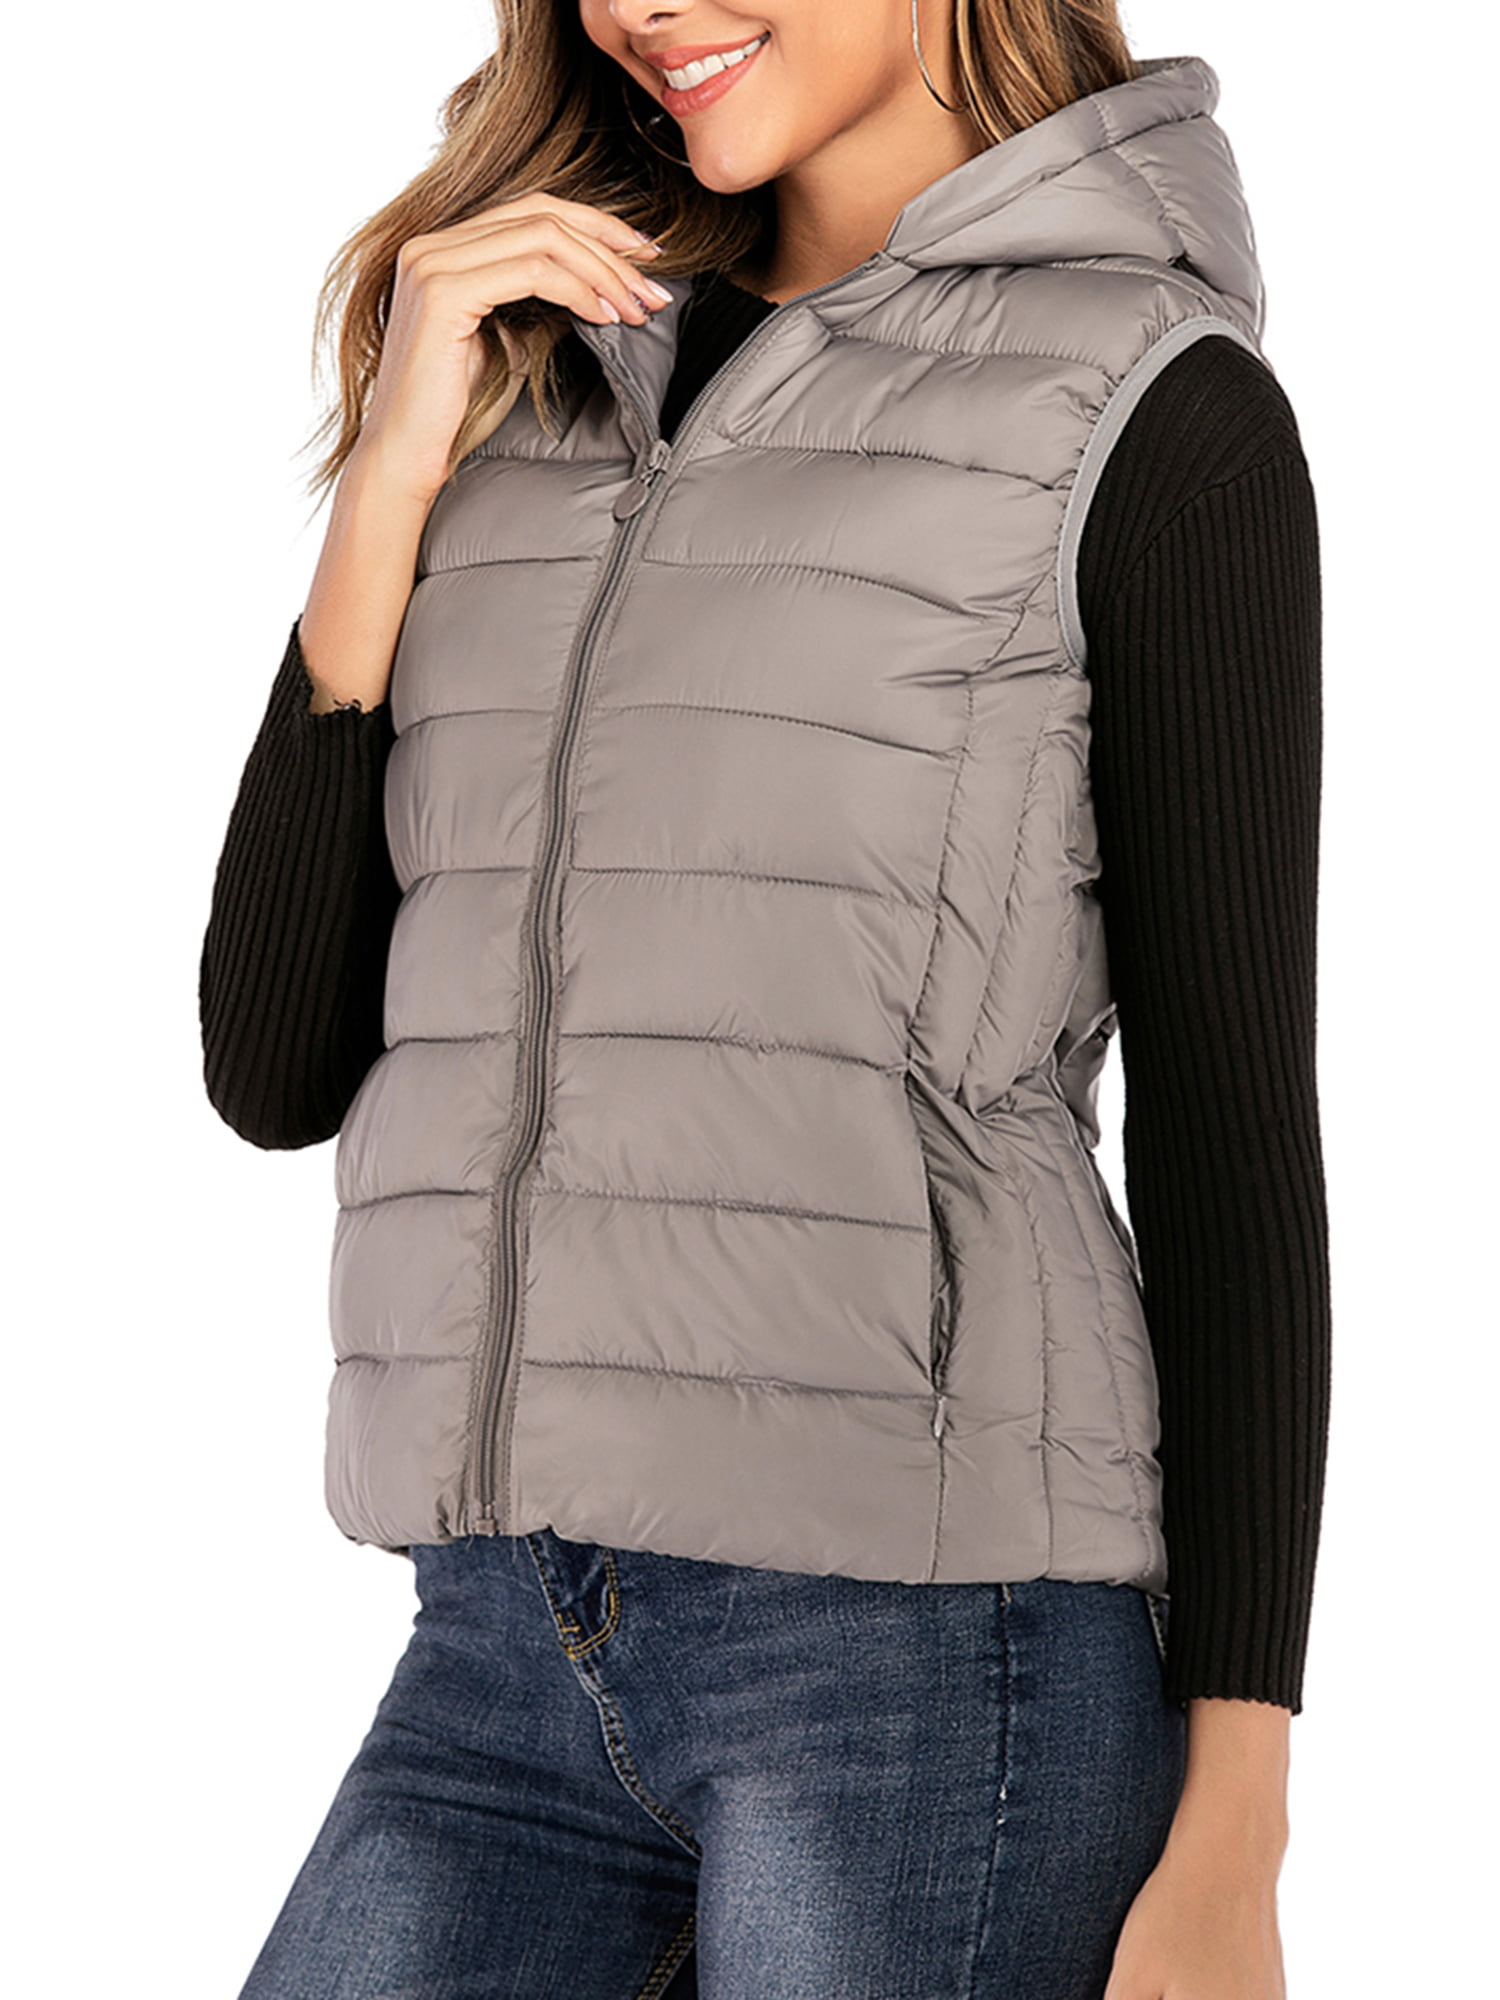 Womens Padded Vest Hoodie Full Zip Up Lightweight Quilted Gilets Outwear Sleeveless Jackets